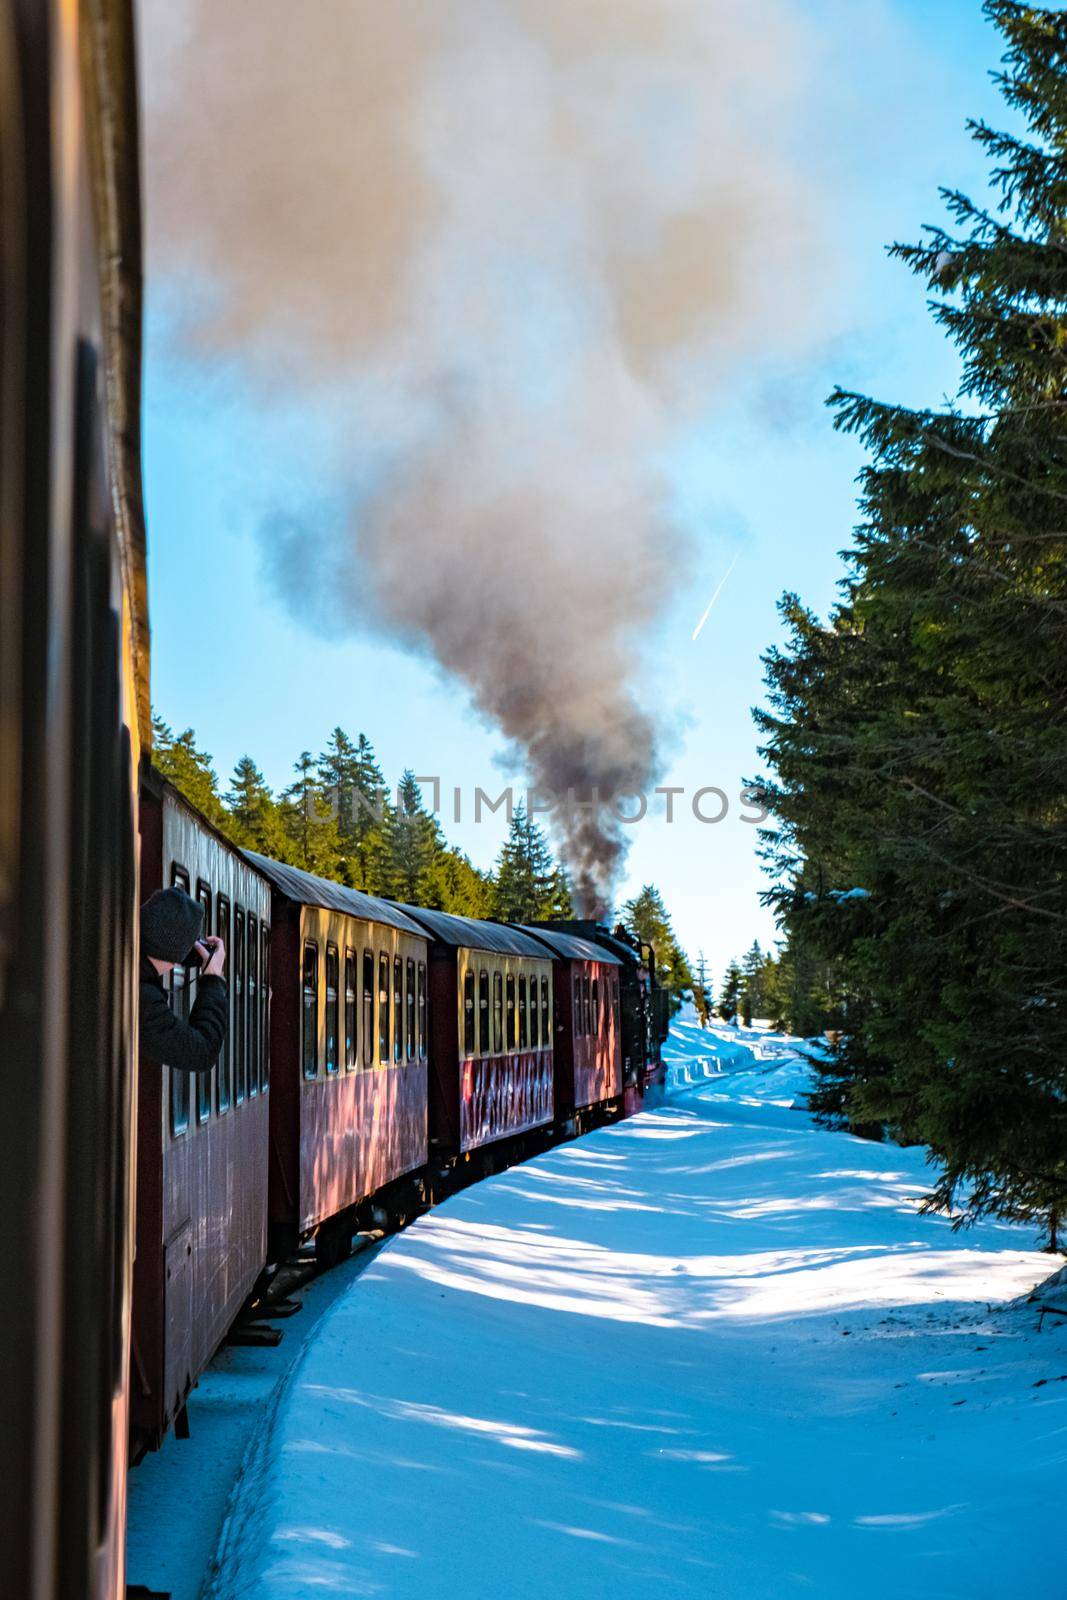 Harz national park Germany, Steam train on the way to Brocken through winter landscape, Famous steam train throught the winter mountain . Brocken, Harz National Park Mountains in Germany by fokkebok